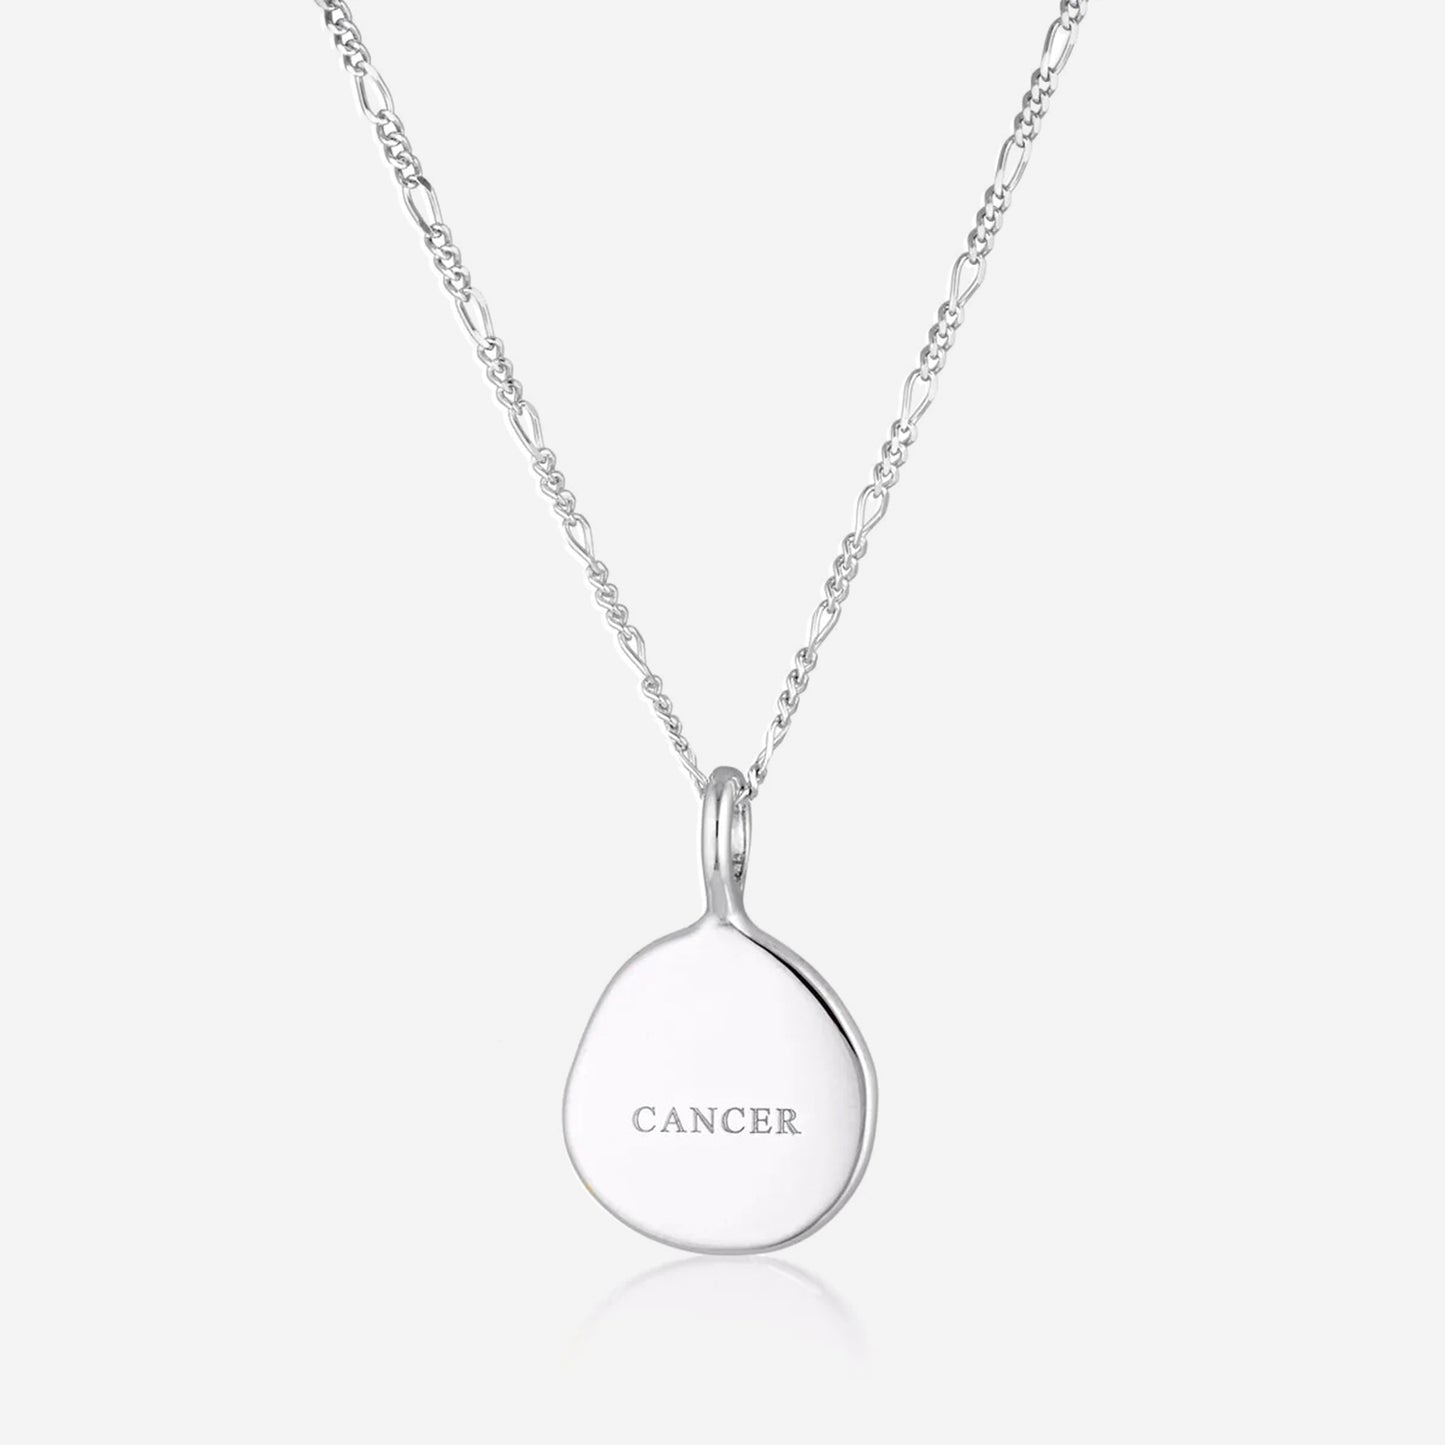 Linda Tahija - Zodiac Cable Necklace - Cancer - Sterling Silver